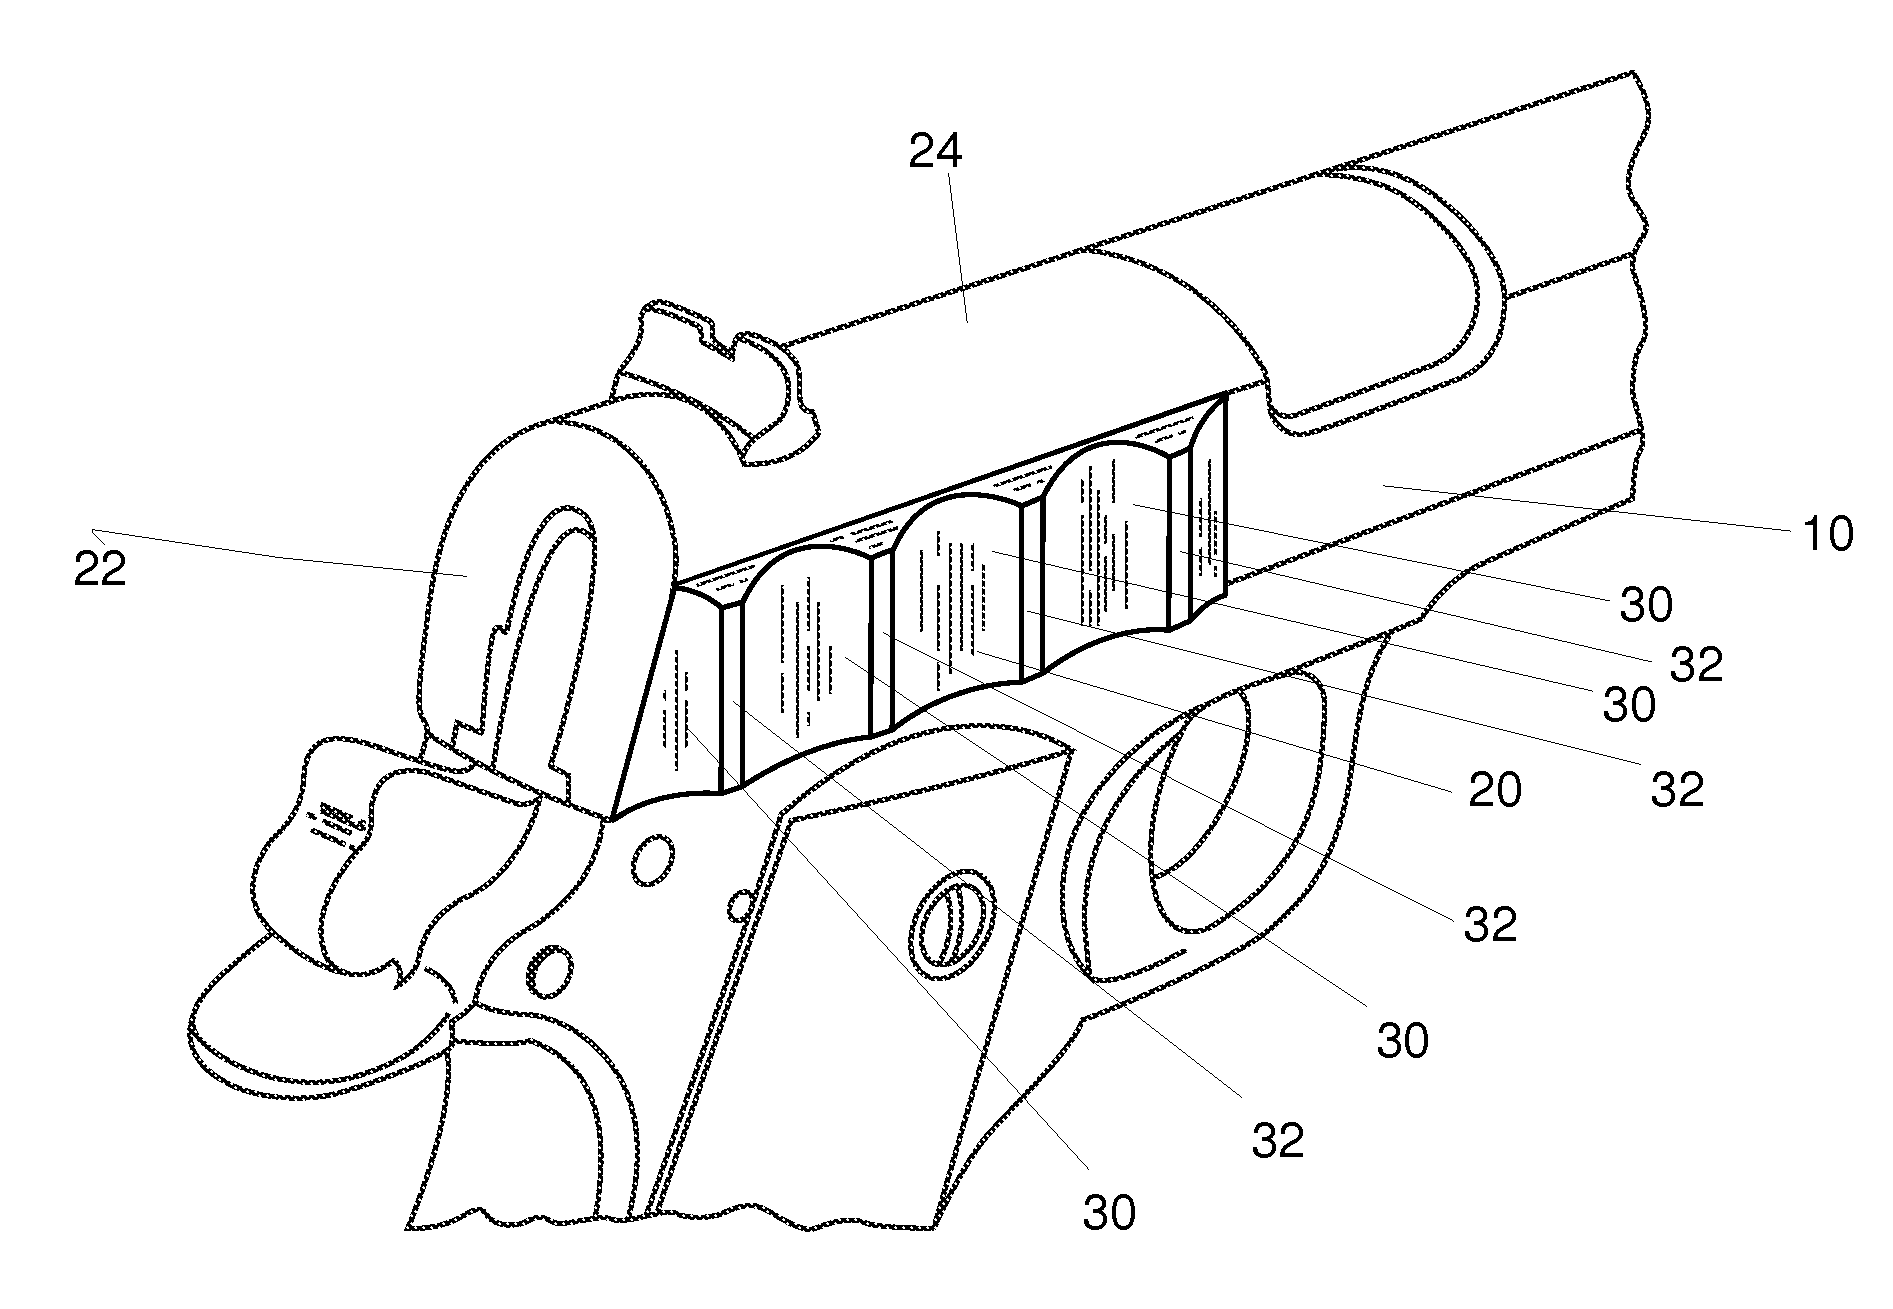 Grip for a Slide of a Semiautomatic Firearm